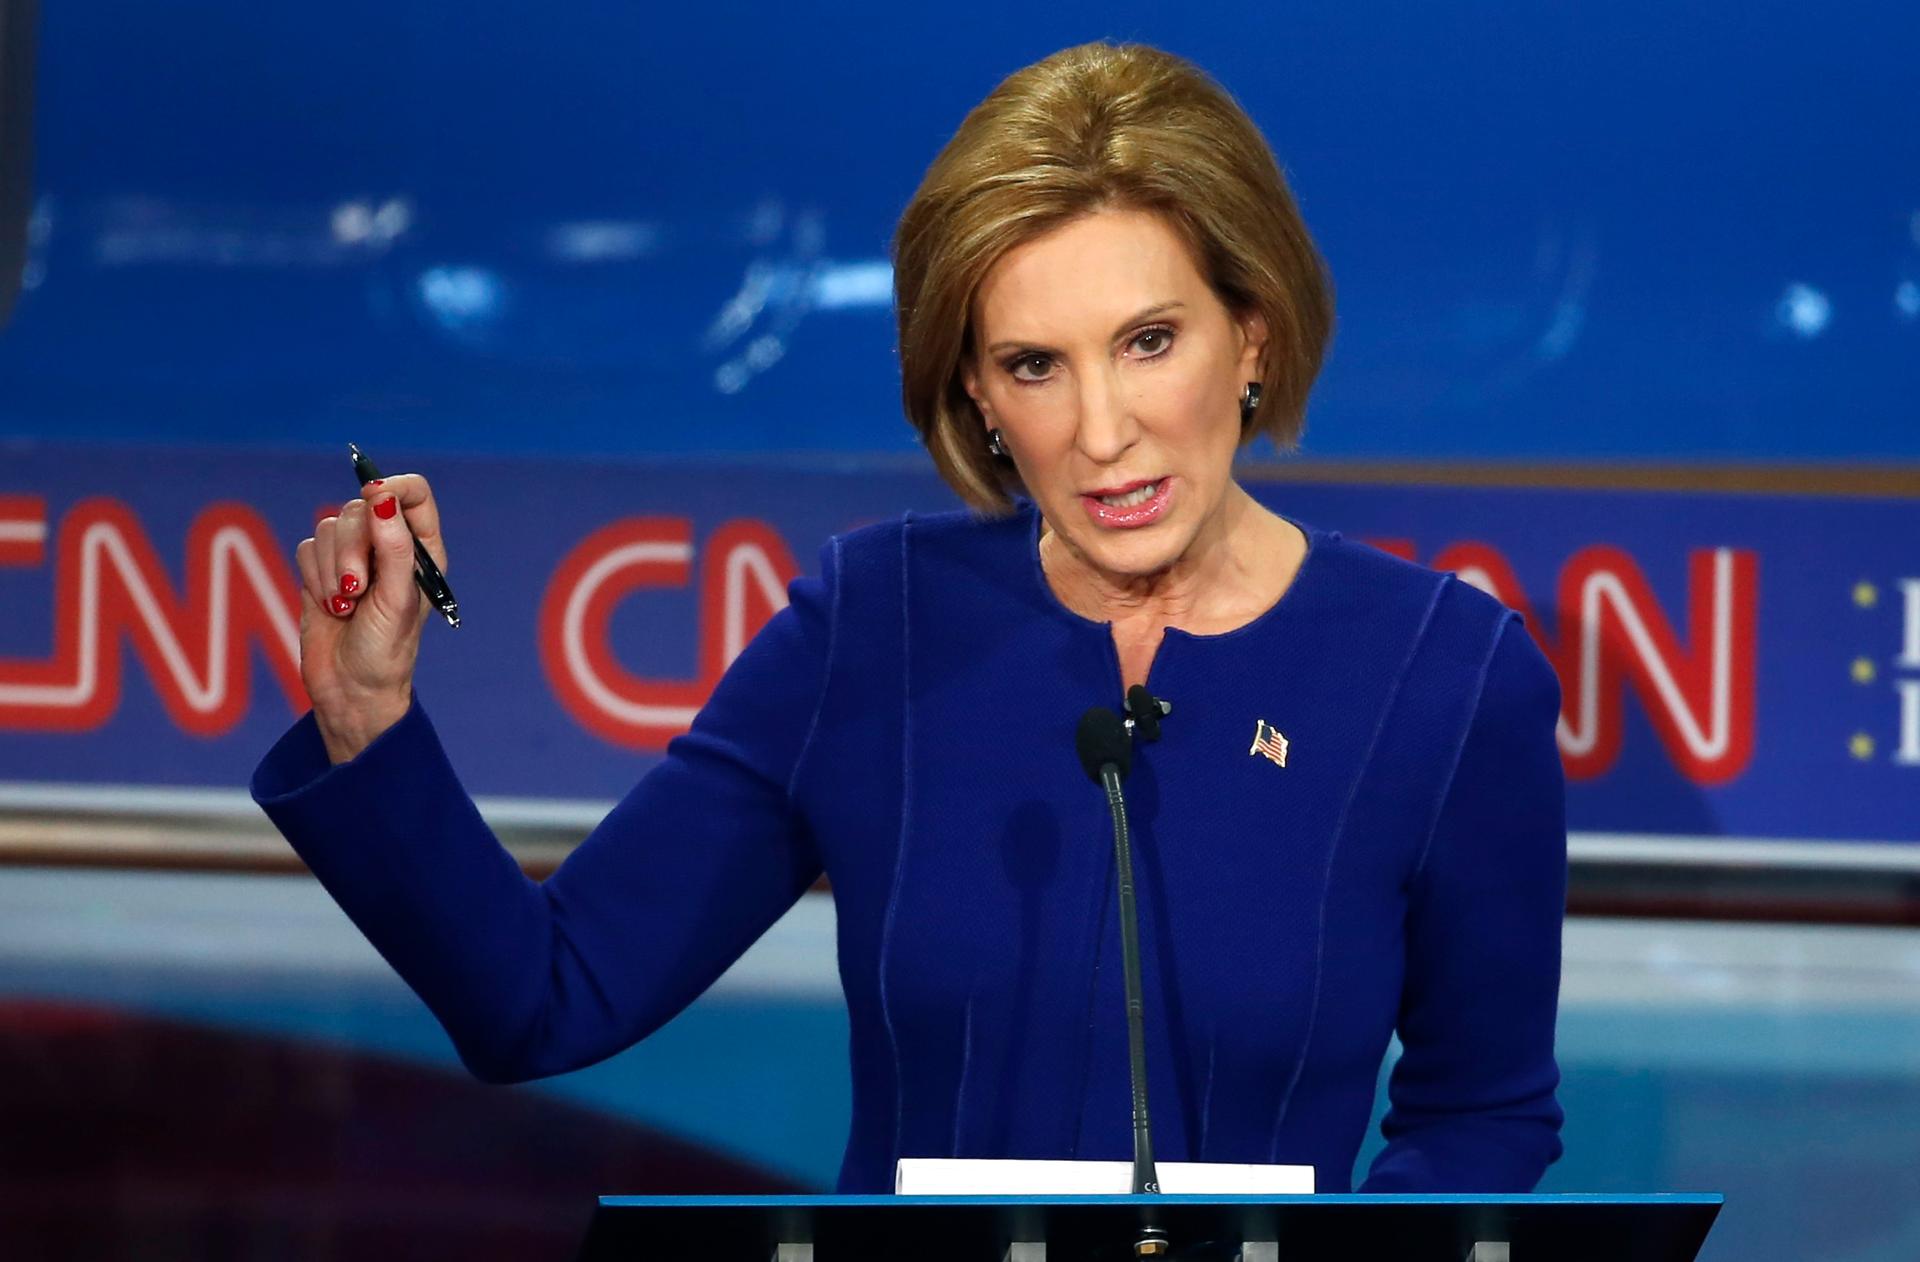 Republican presidential candidate and former Hewlett Packard CEO Carly Fiorina speaks during the second official Republican presidential candidates debate of the 2016 U.S. presidential campaign at the Ronald Reagan Presidential Library in Simi Valley, Cal